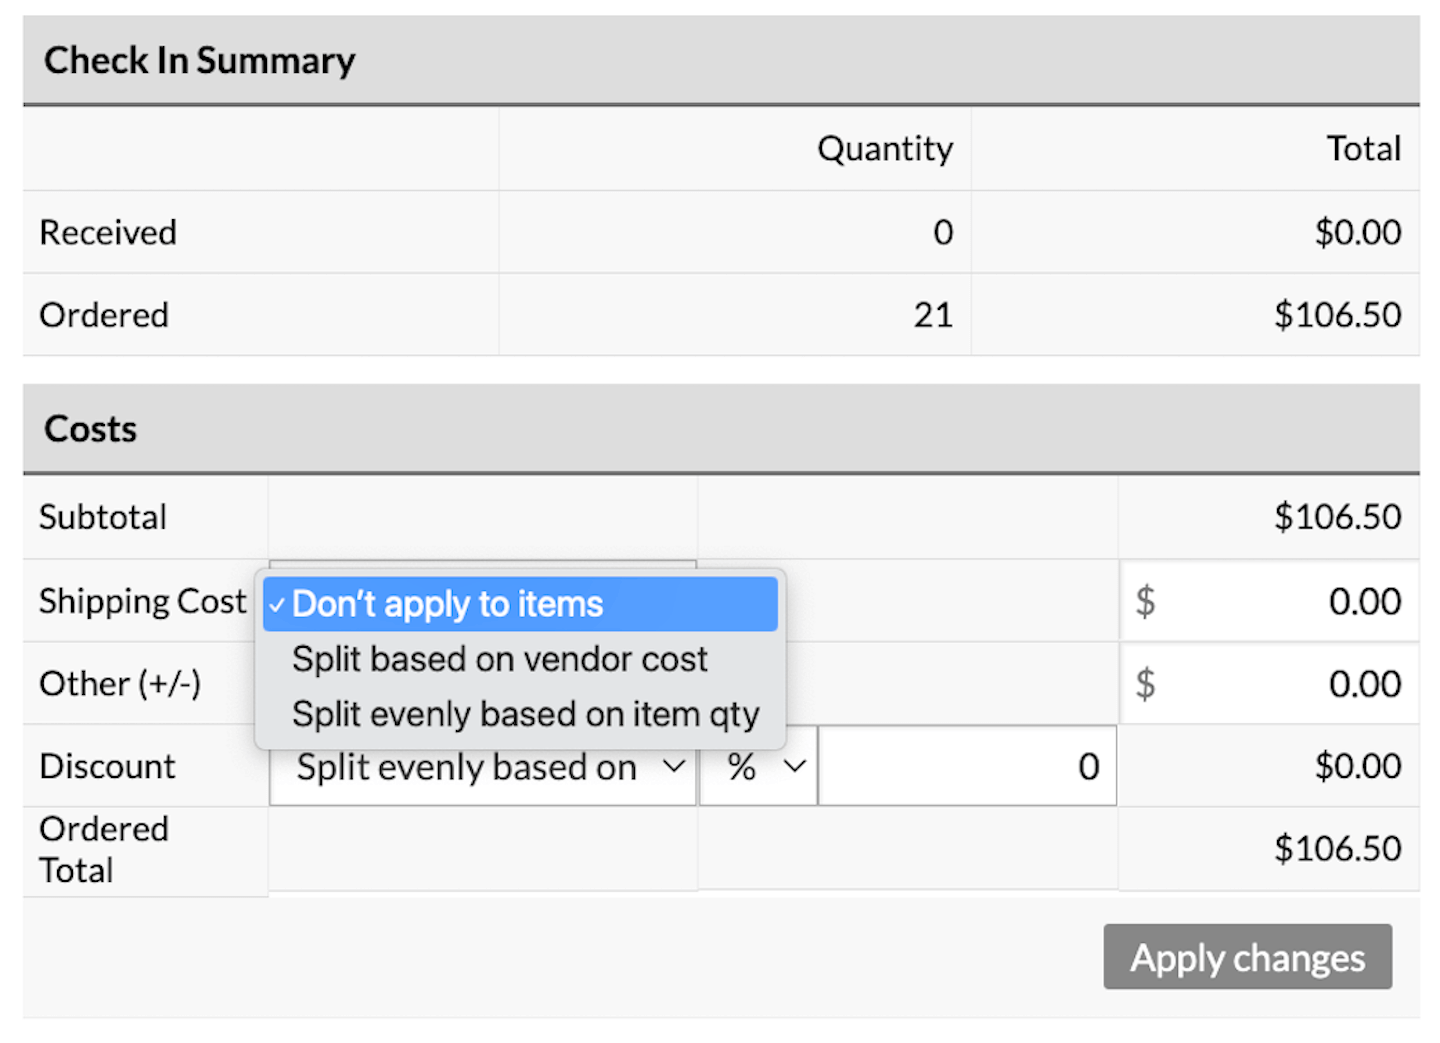 Shipping cost drop-down list, showing options Don't apply to items, Split based on vendor cost, and Split evenly based on item quantity.